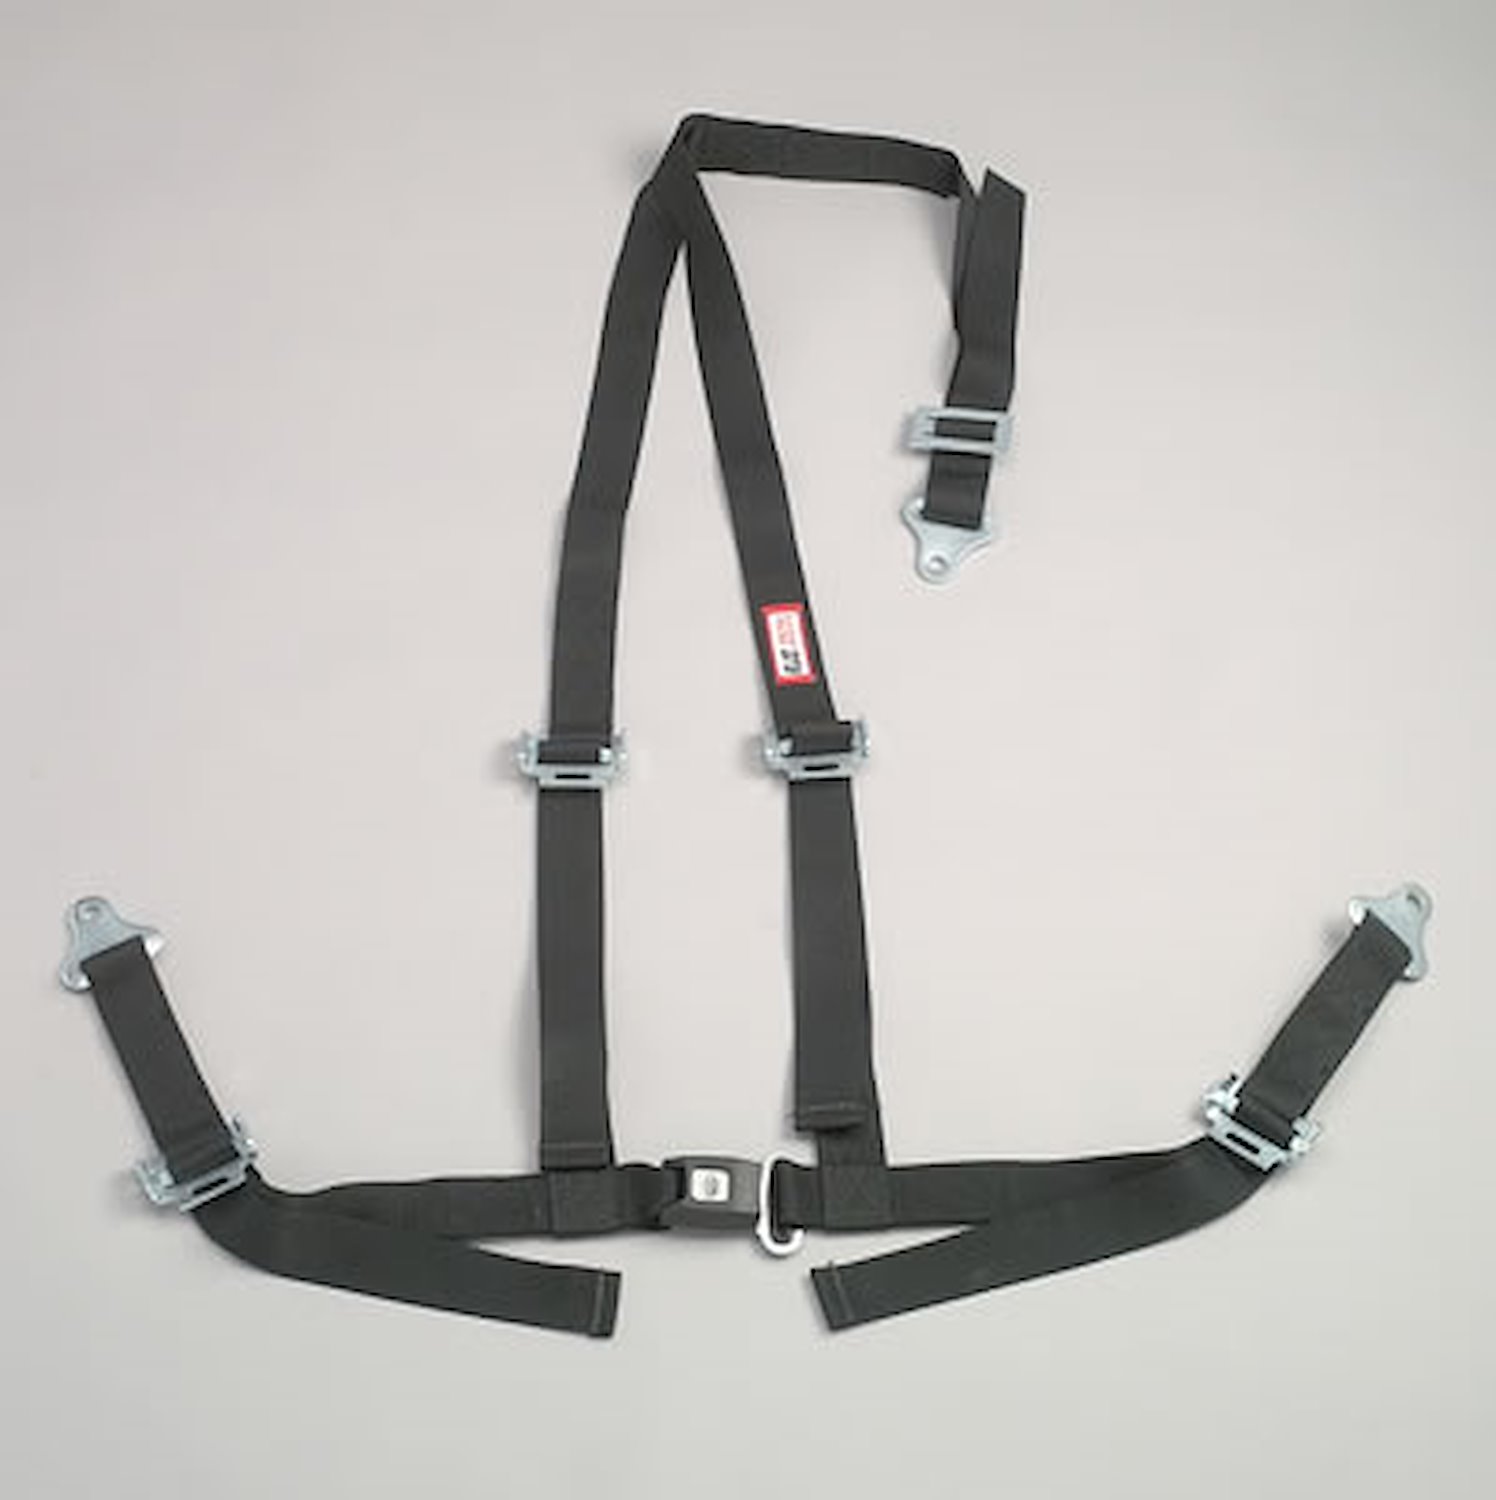 NON-SFI B&T HARNESS 2 PULL UP Lap Belt SNAP 2 S. H. Y FLOOR Mount WRAP/SNAP w/STERNUM STRAP GRAY